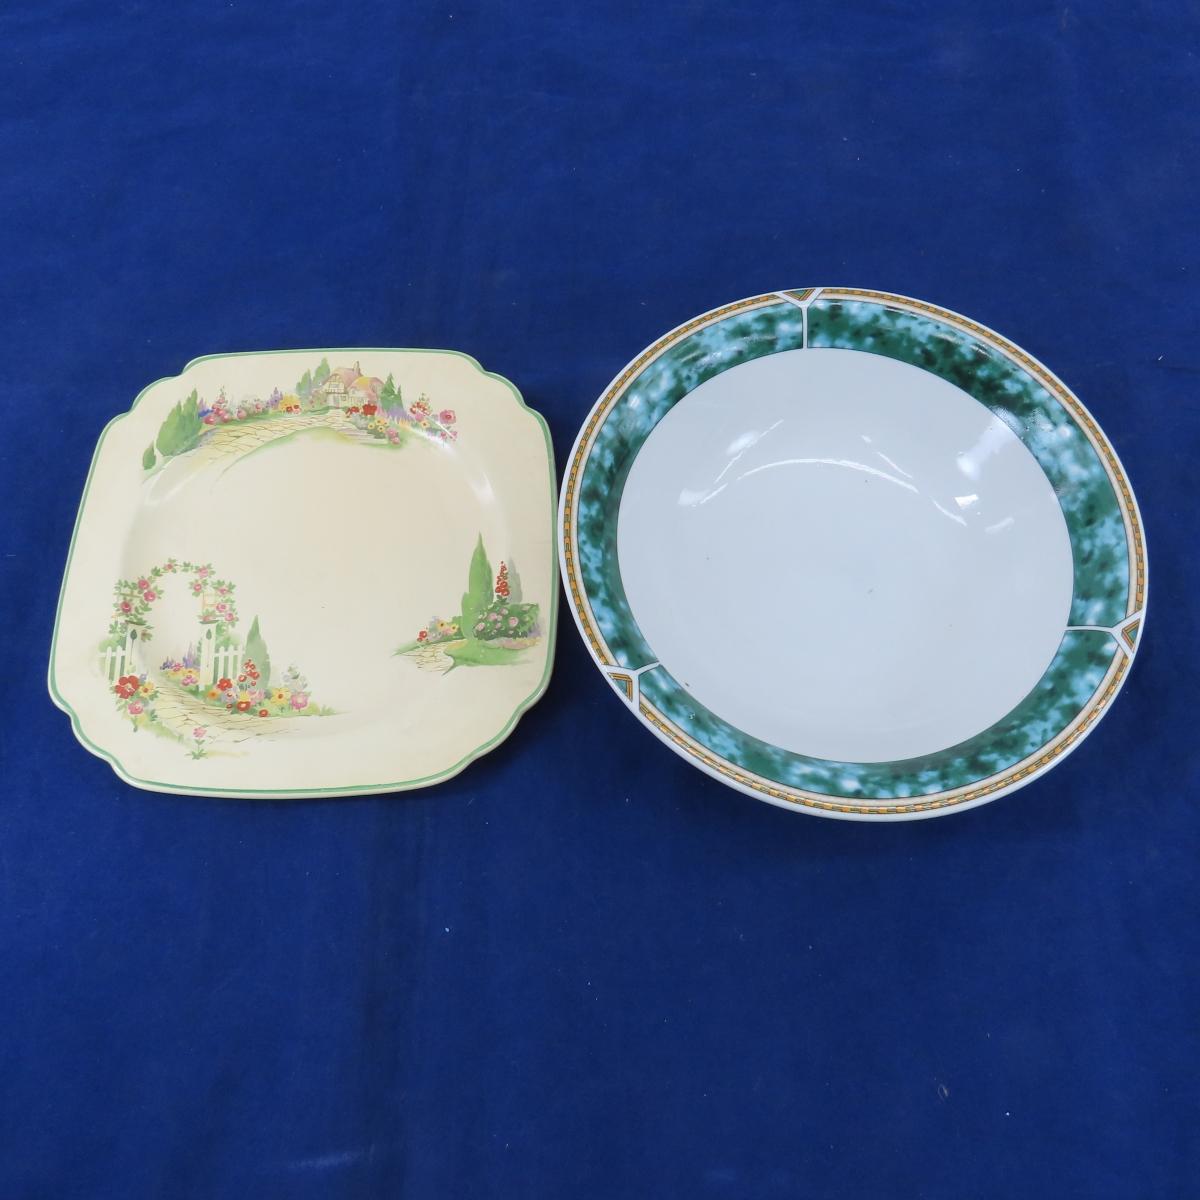 Blue Willow and Other Vintage Porcelain Ware